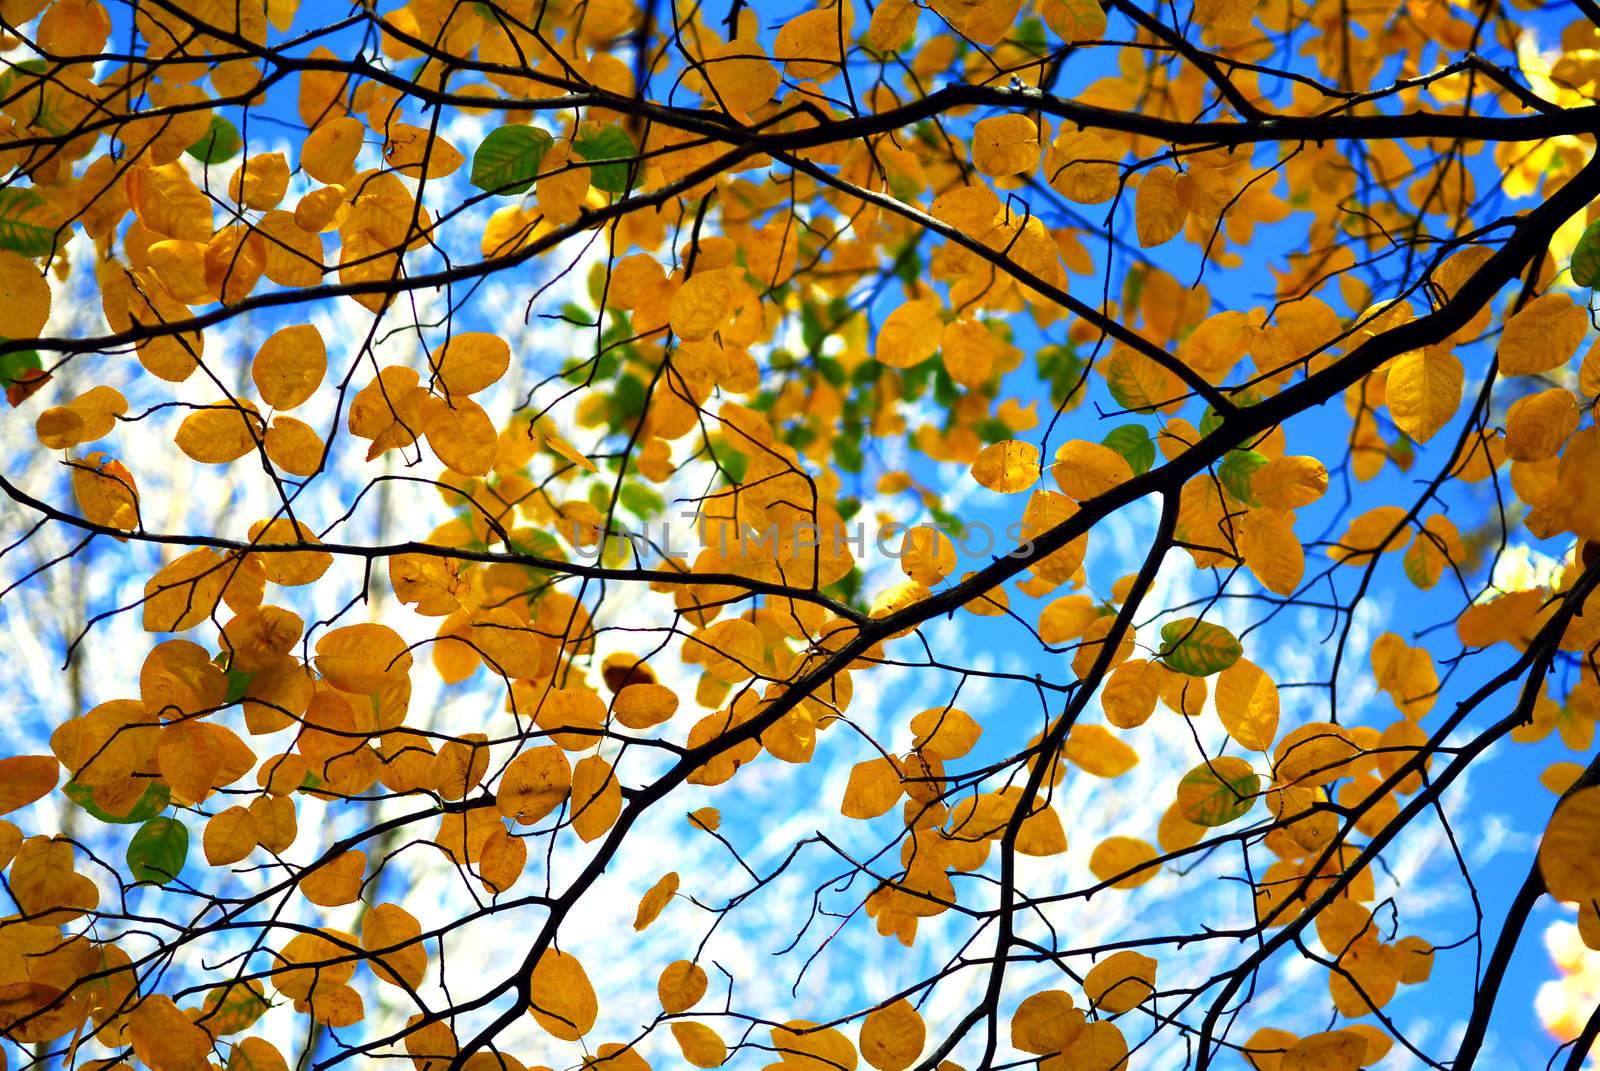 Tree branches with fall yellow leaves on blue sky background in autumn forest